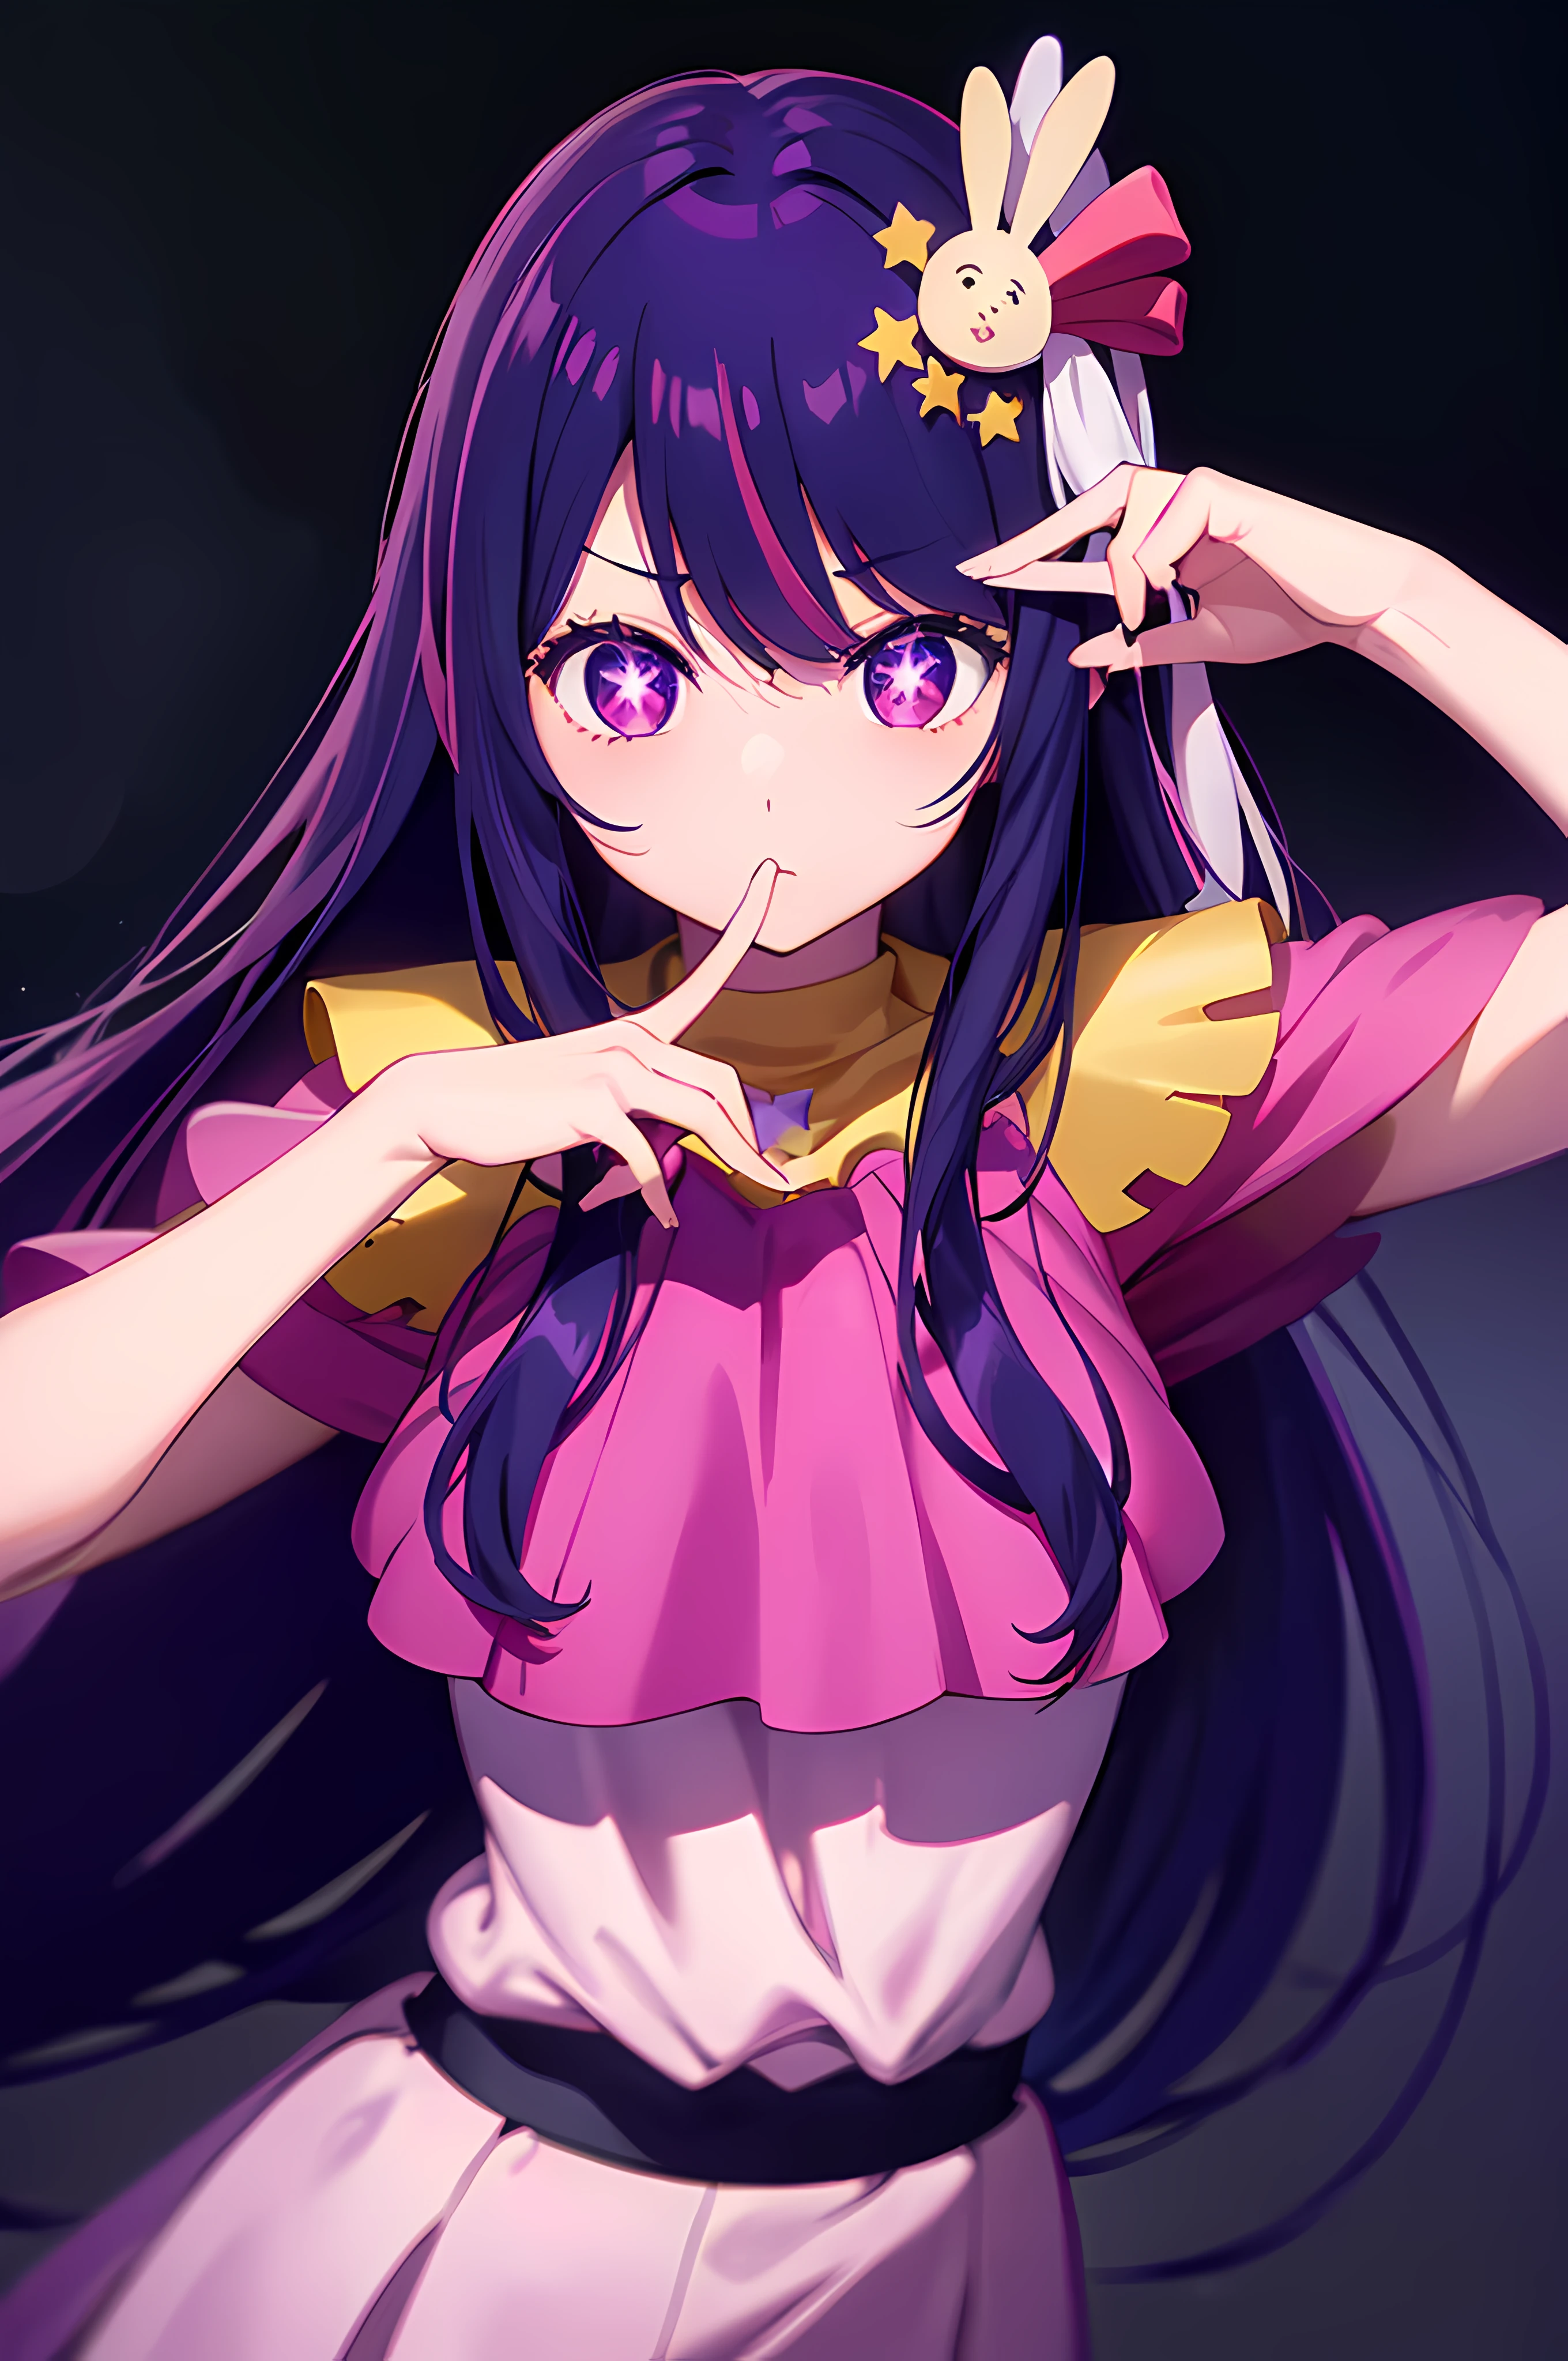 Hoshino Ai, long hair, purple hair, streaked hair ,purple eyes, star-shaped pupils, hair ornament, (masterpiece), best quality, expressive eyes, perfect face, anime girl with purple shiny hair and seifuku, medium_oppai, beautiful alluring anime woman, female anime character, official anime still, beautiful alluring anime teen, anime best girl, attractive anime girl, oppai proportions, 1 girl, sexy pose, perfect body, perfect fingers